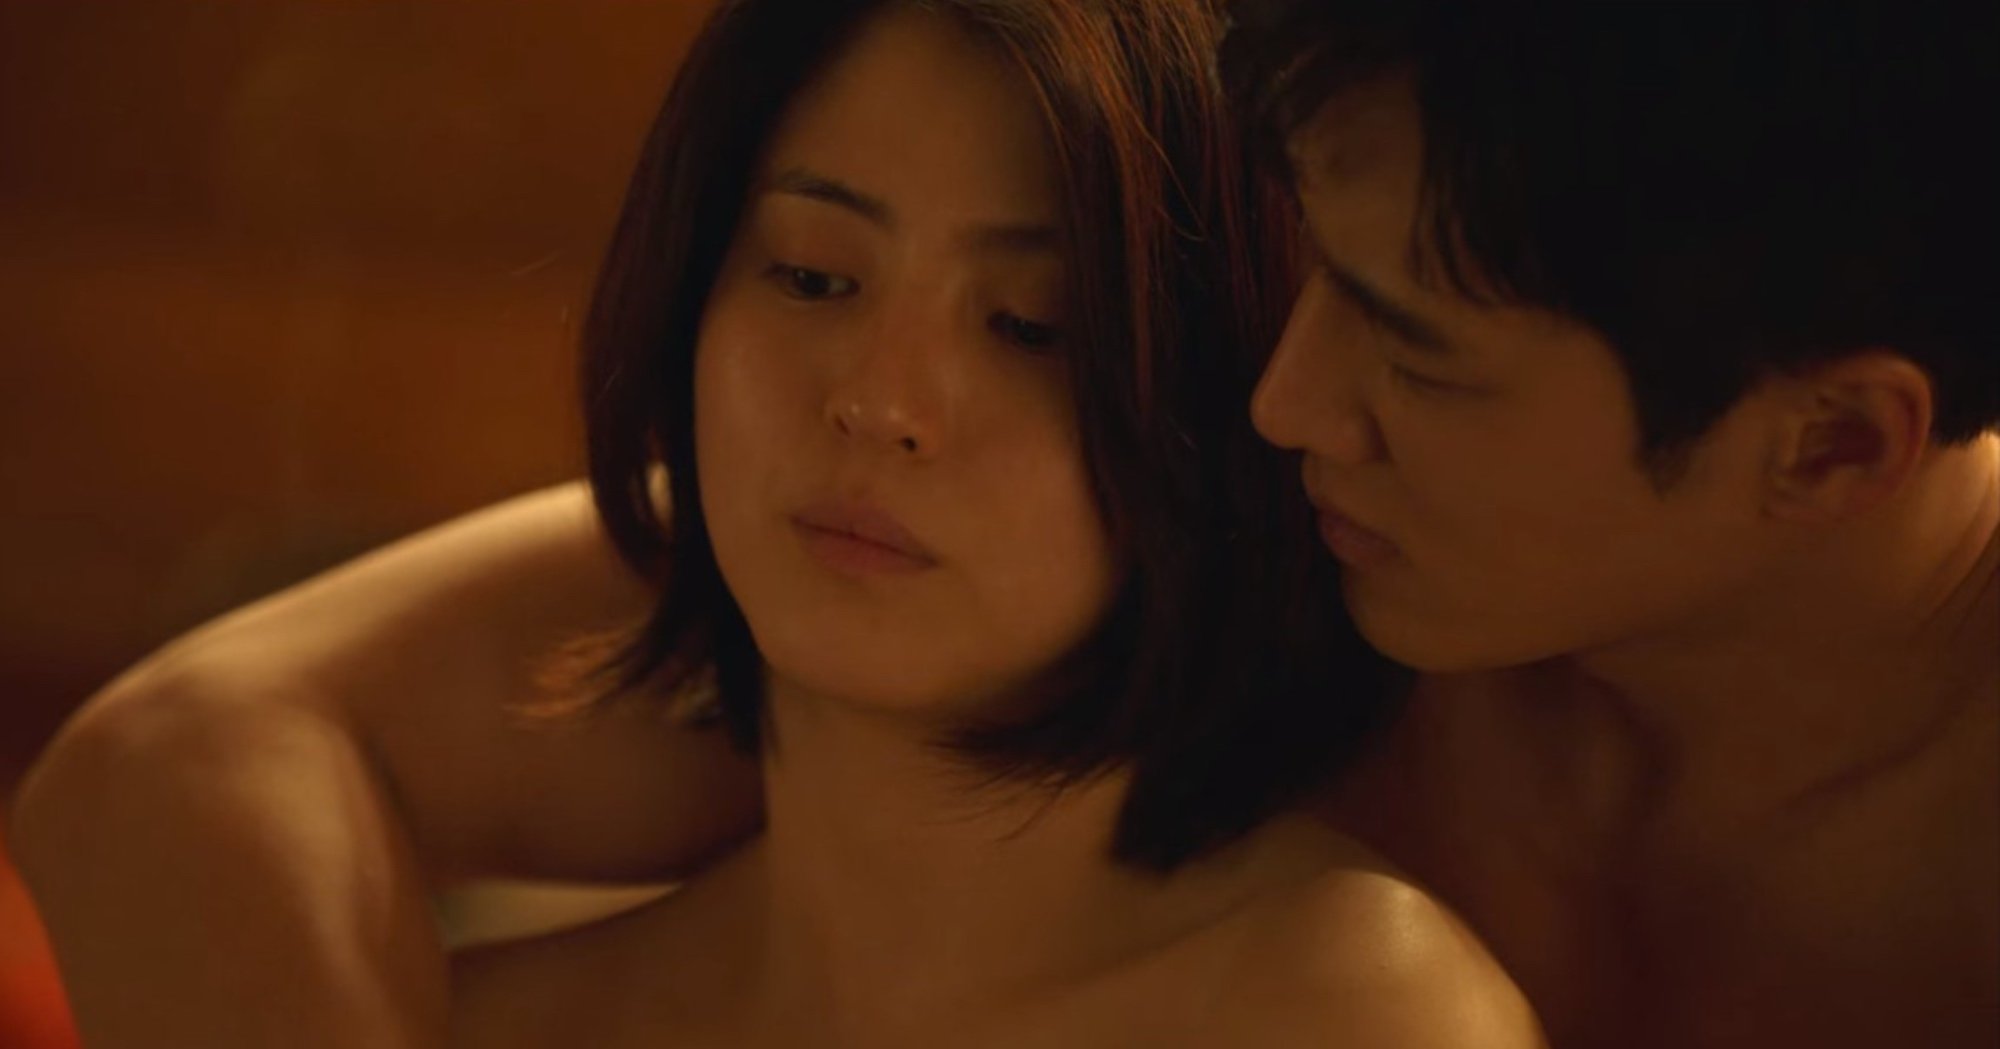 Main characters in 'My Name' K-drama sex scene leaning against each other.